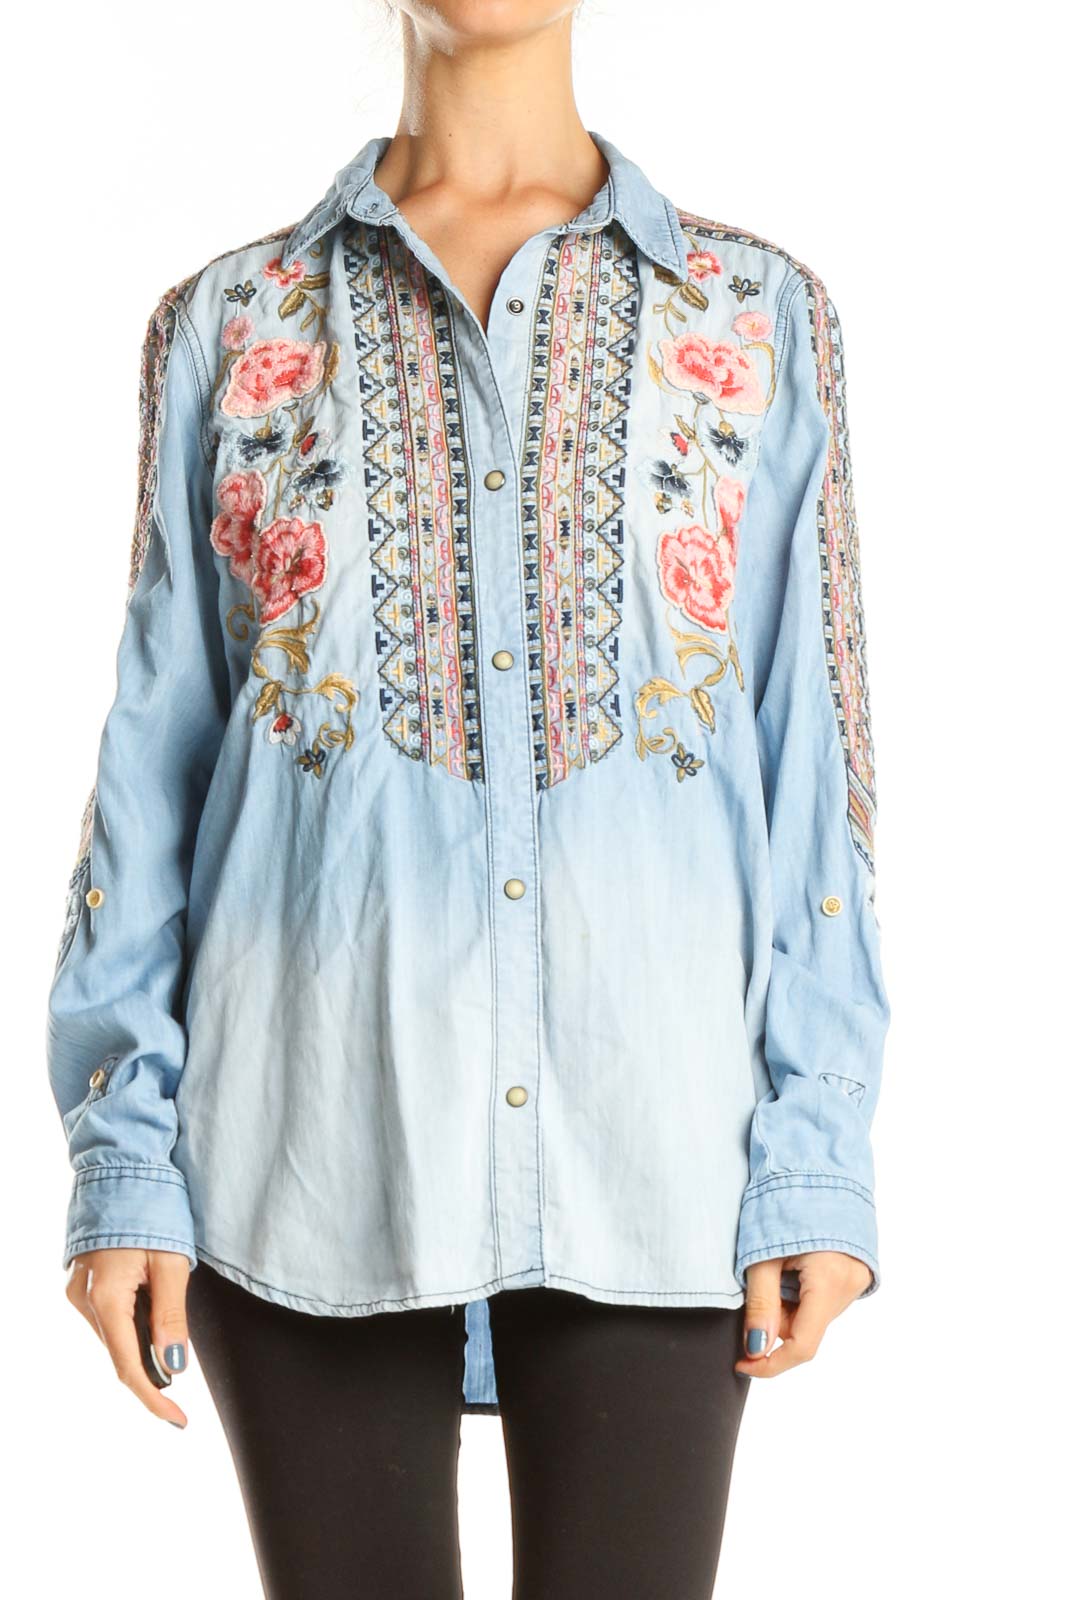 Blue Embroidered Denim Bohemian Top Front